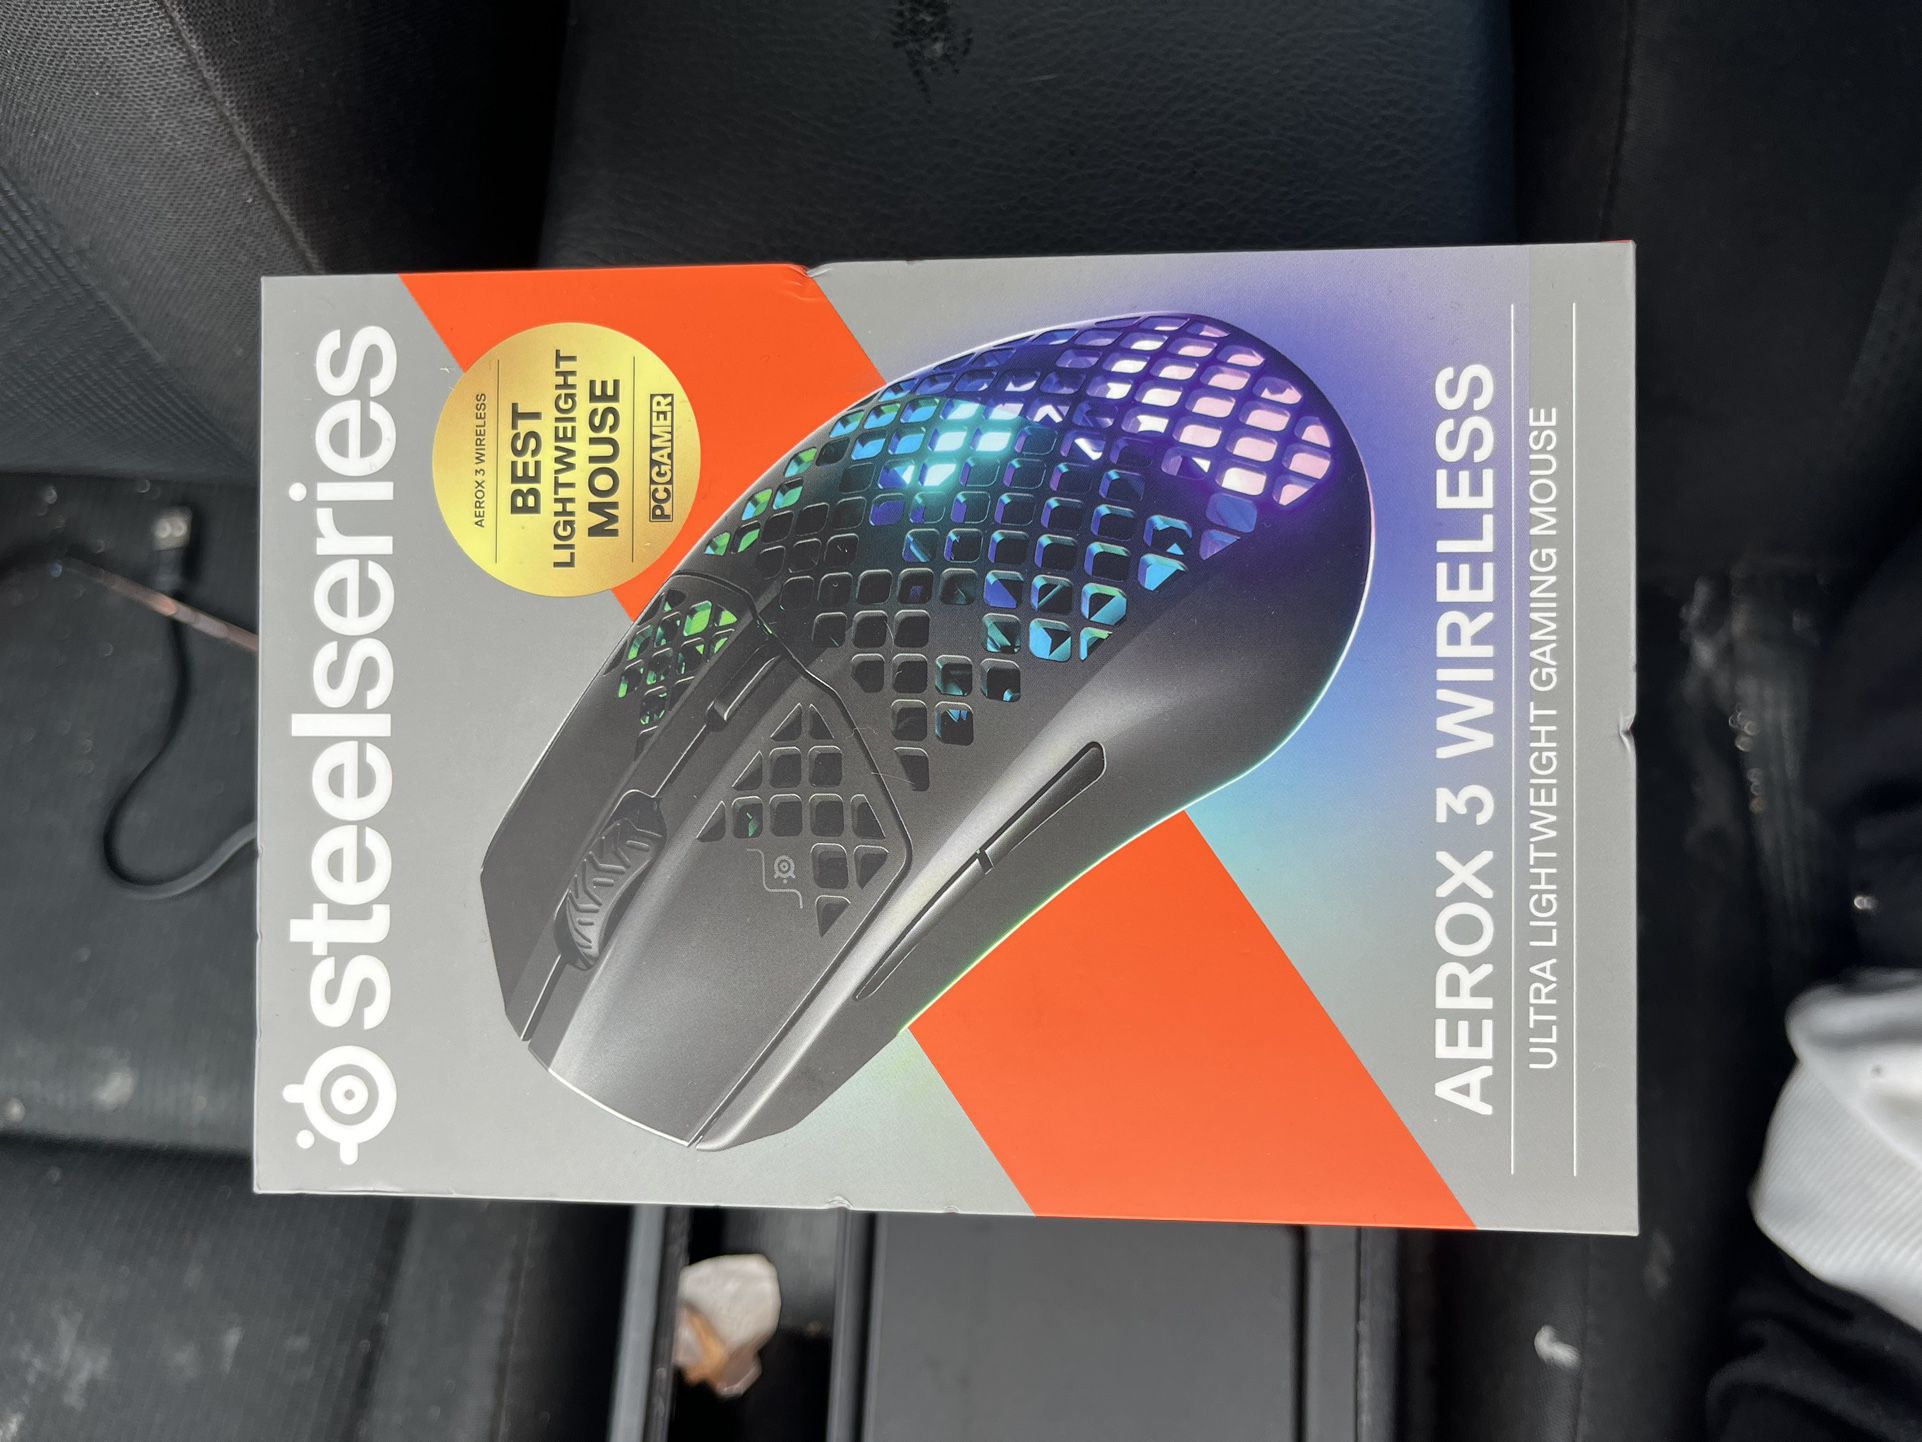 Steelseries Aerox 3 Wireless Ultra Lightweight Gaming Mouse